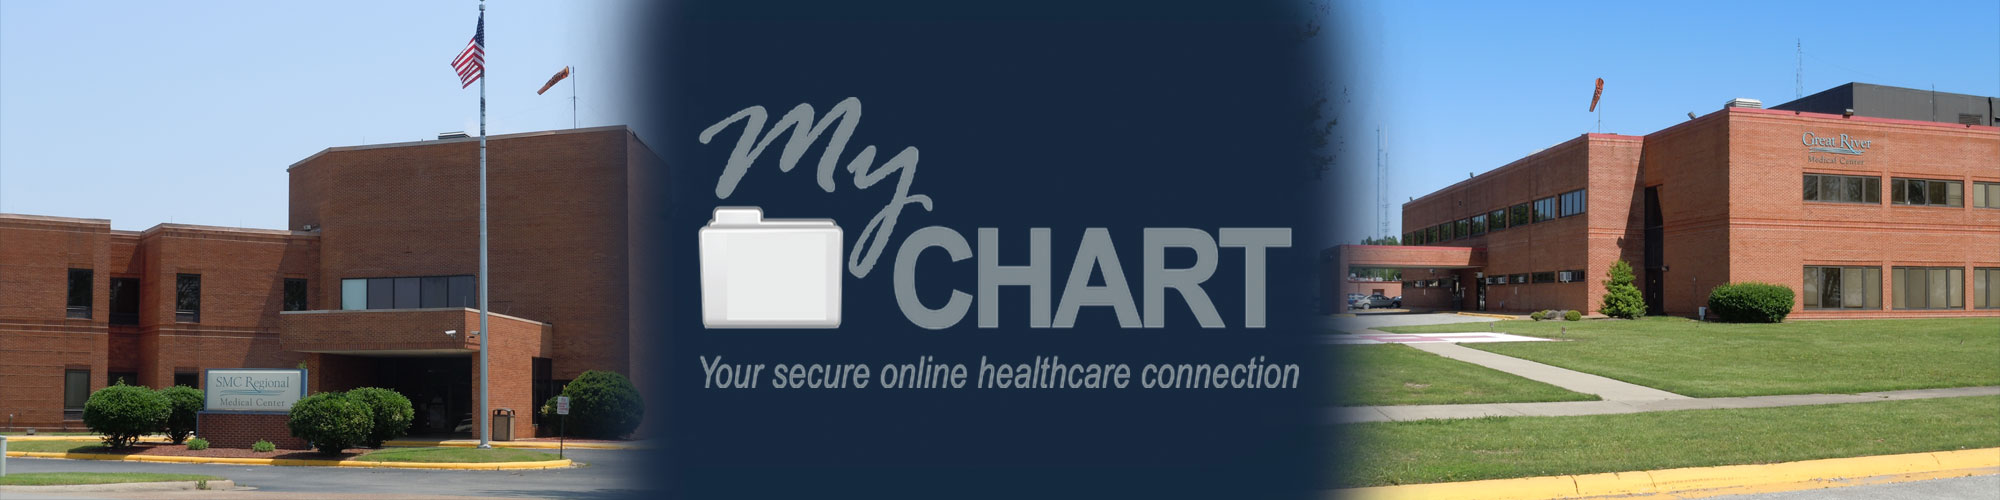 Banner picture of South Mississippi County Regional Medical Center and Great River Medical Center. Baner says:

My CHART (filing folder)
Your secure online healthcare connection